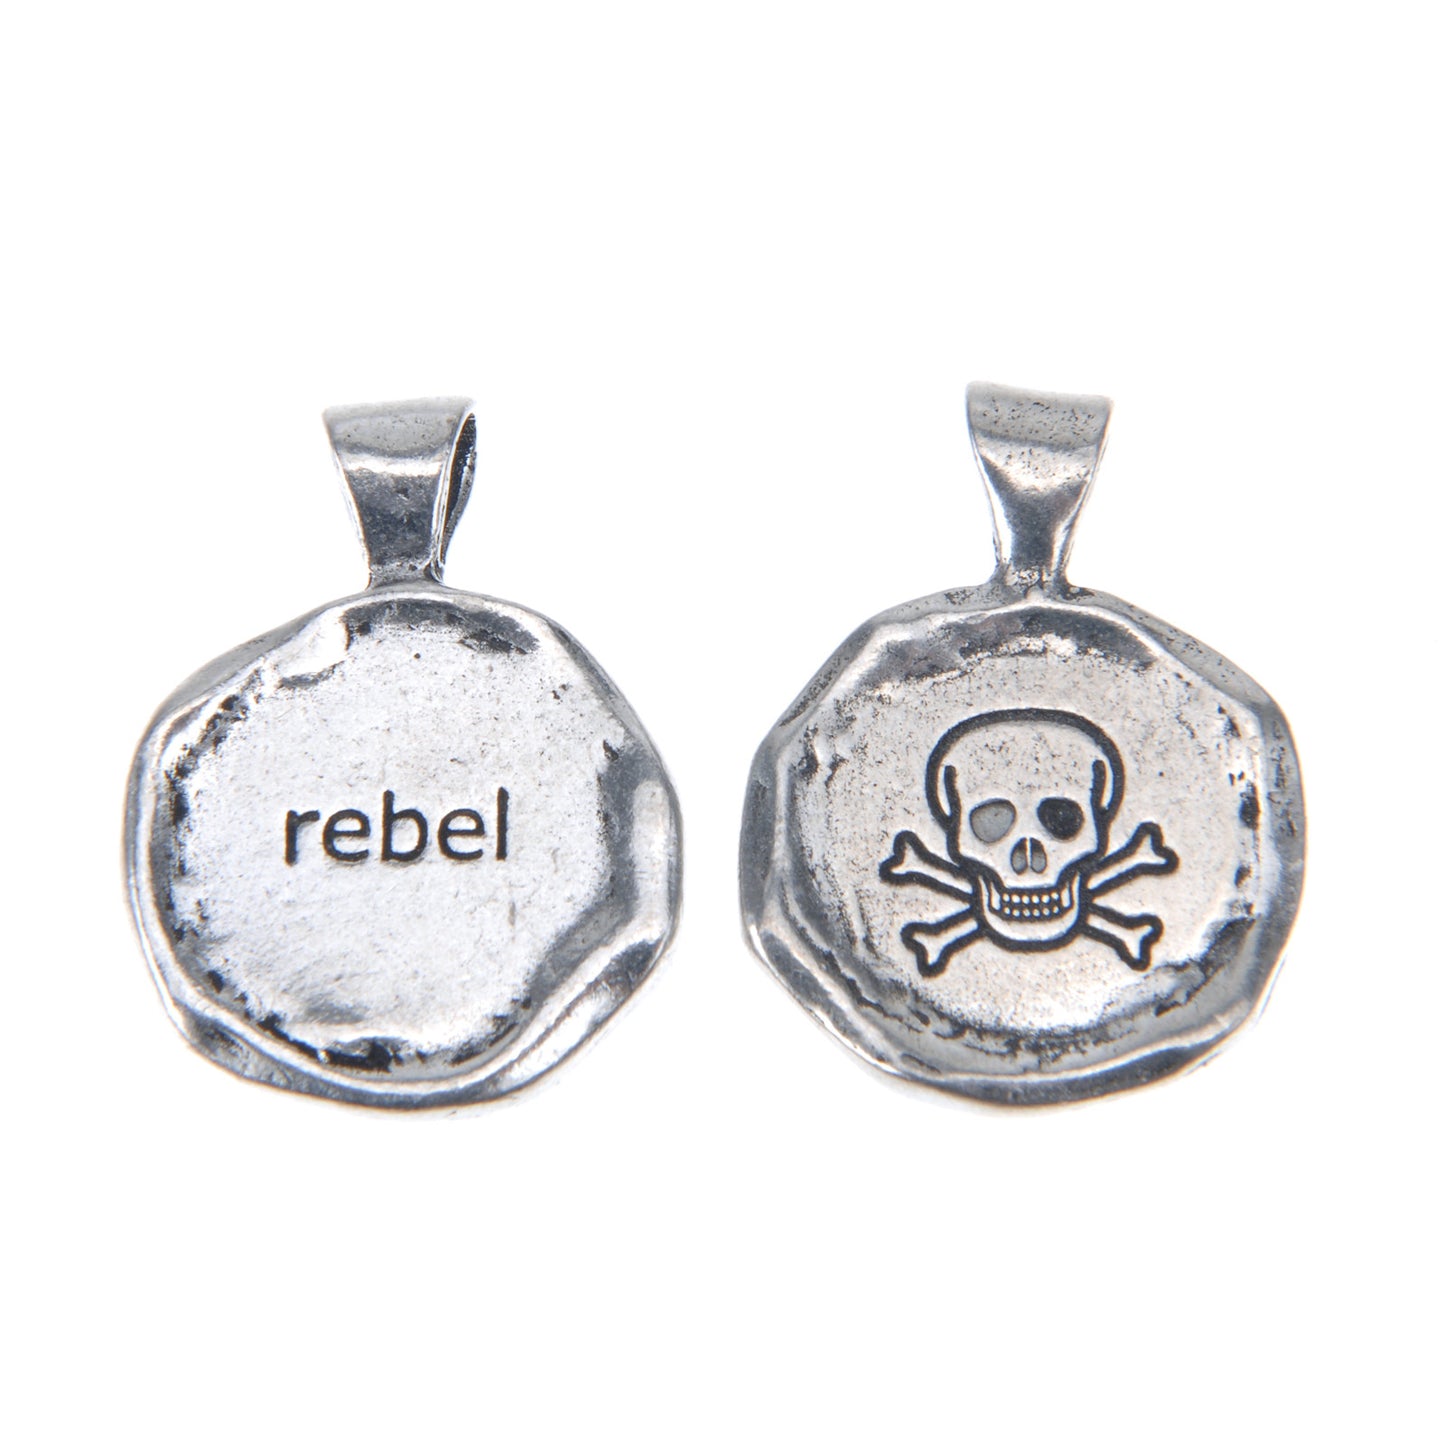 Rebel Wax Seal front and back